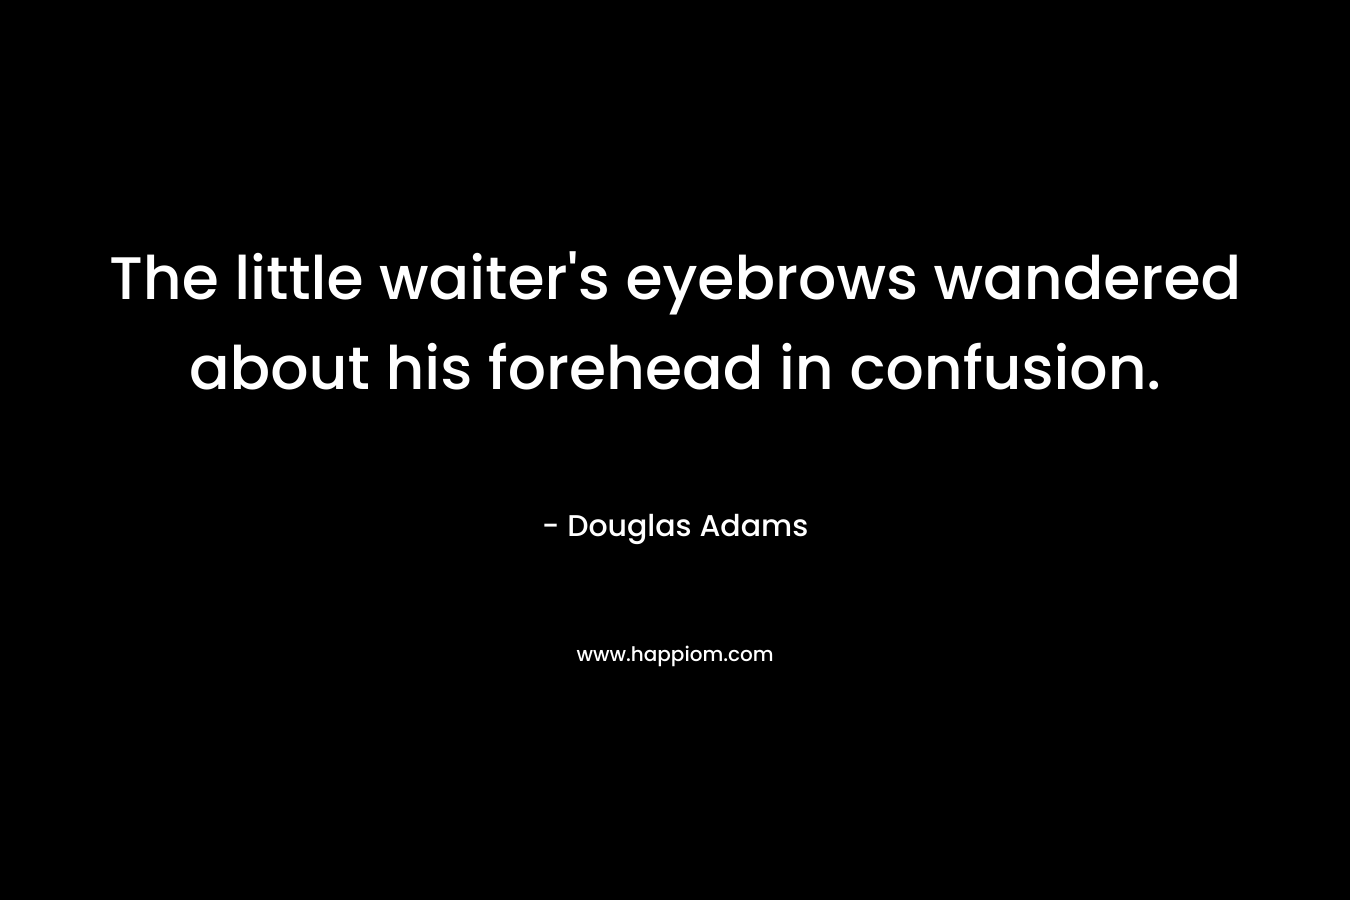 The little waiter’s eyebrows wandered about his forehead in confusion. – Douglas Adams